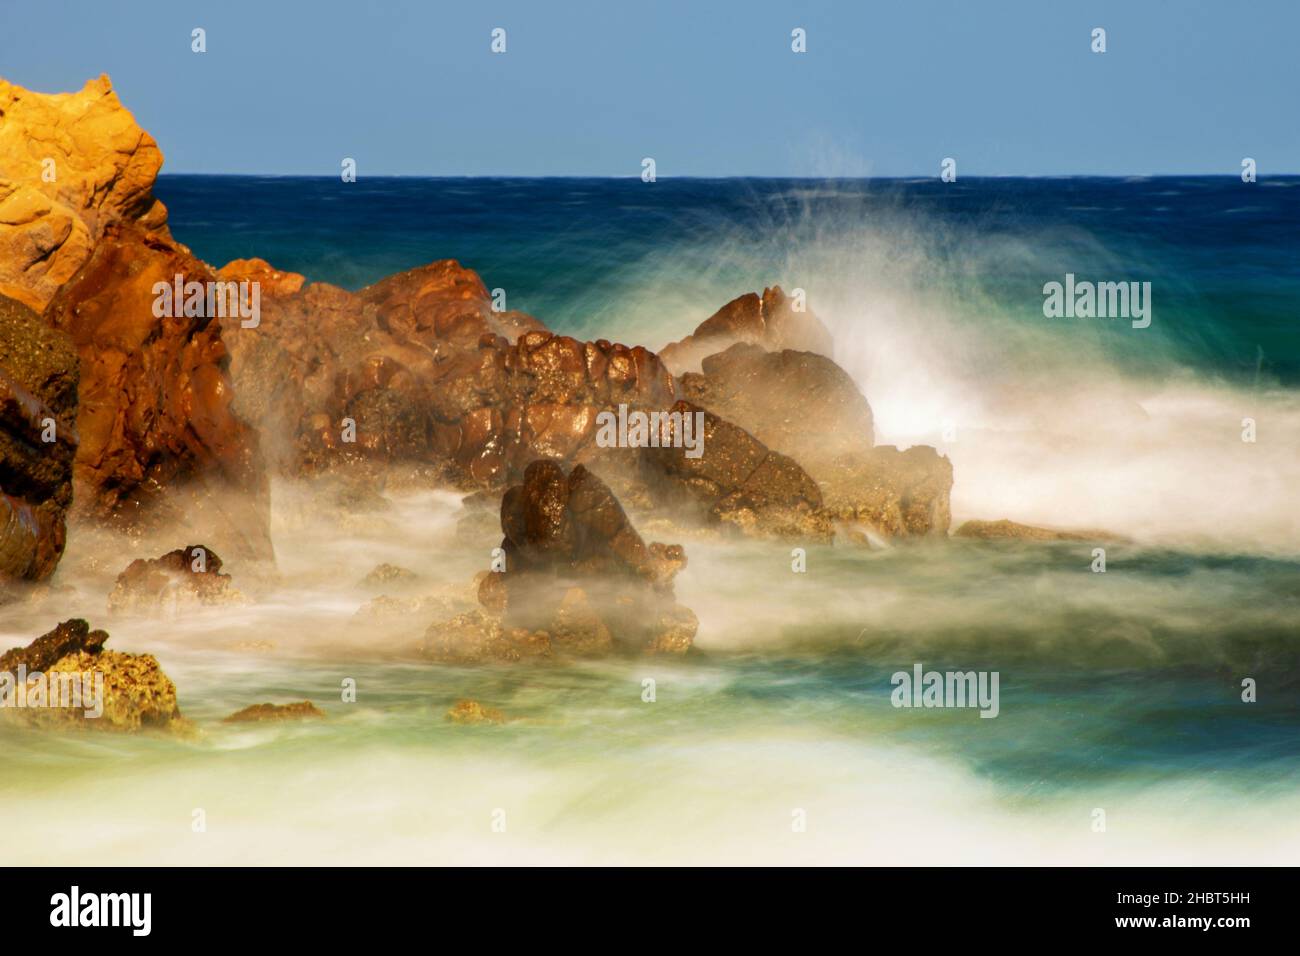 Power of sea surf, stormy water sprays high on rock cliff in windy sunny summer day. Limnos, Greece. Stock Photo